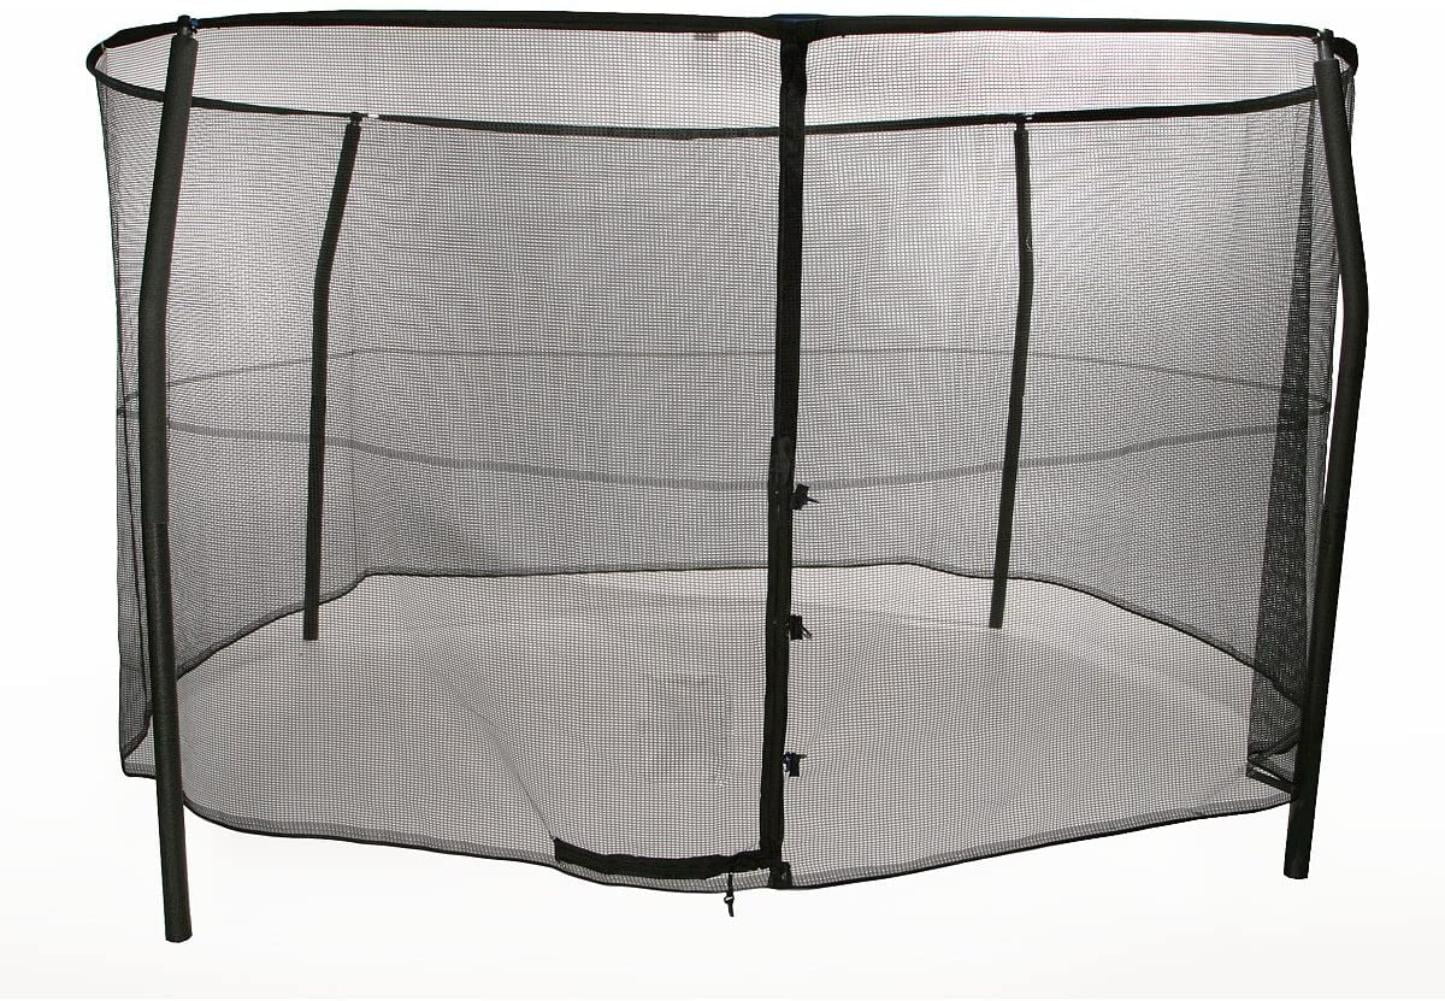 Jumpking 14' G4 Enclosure System for all Trampolines with 4 U-legs BZ1409E4, Product Type: SPORTING_GOODS By Brand Bazoongi